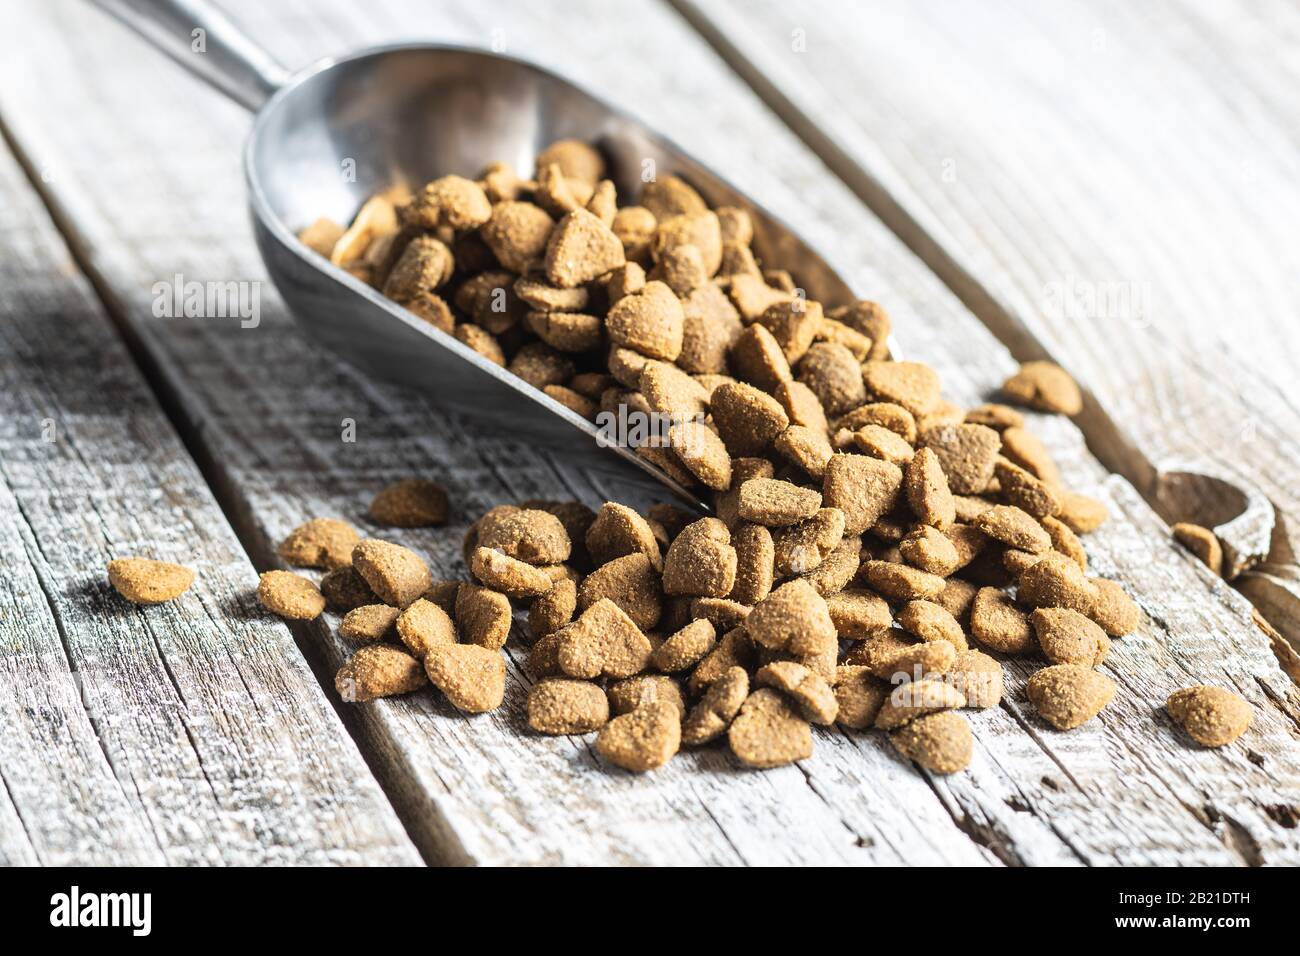 Dried kibble pet food in scoop. Heart shape dried animal food on old wooden table. Stock Photo